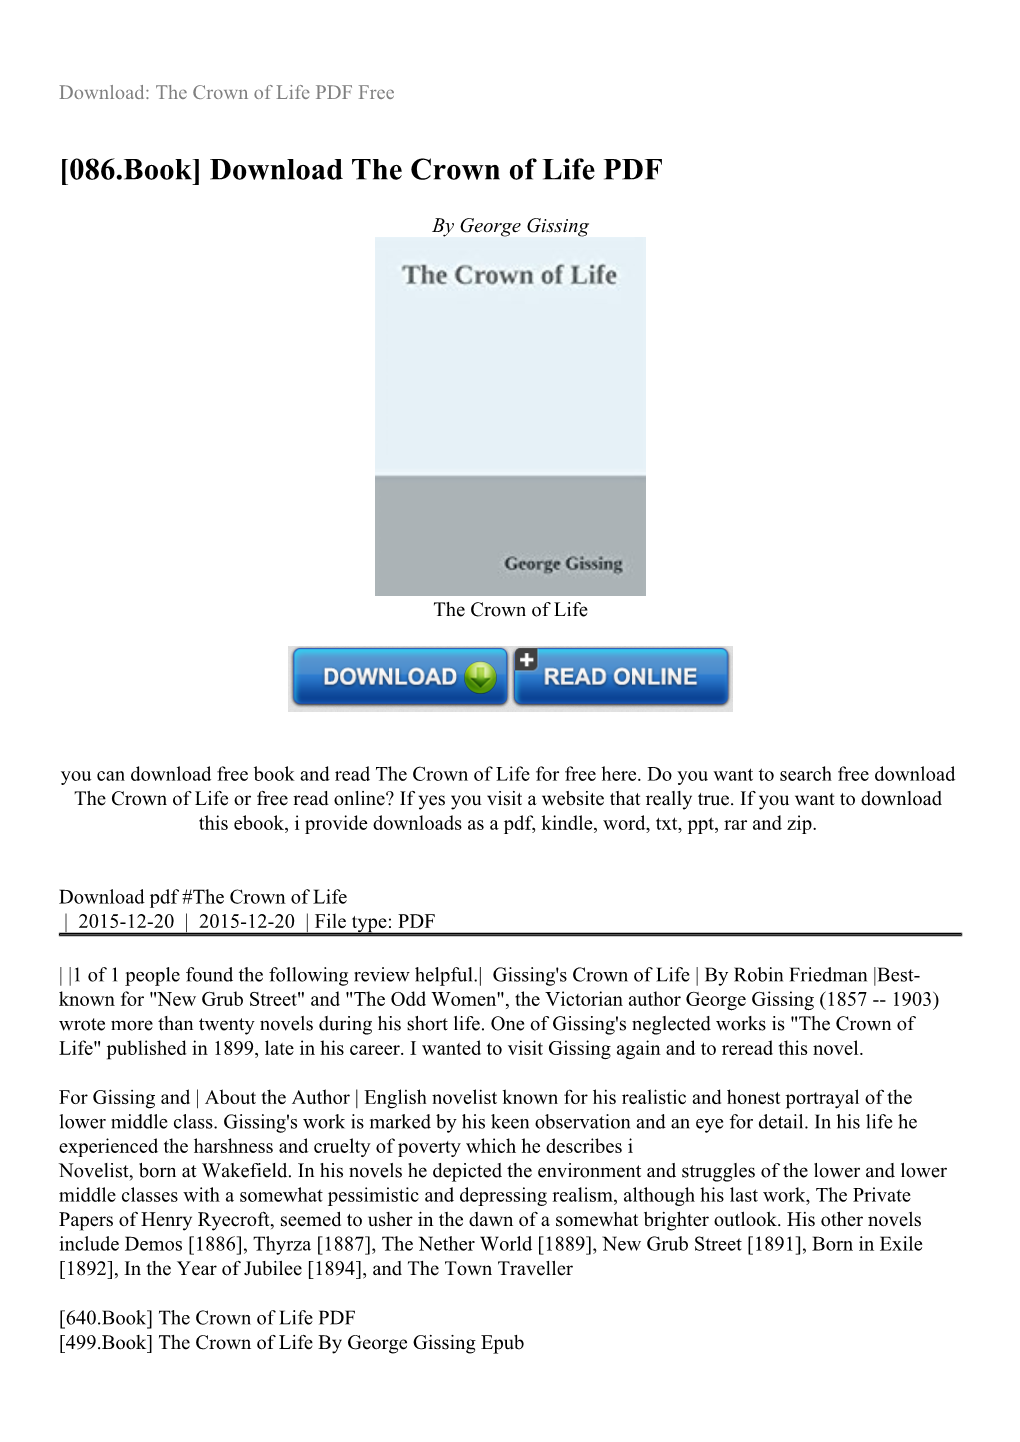 Download the Crown of Life PDF